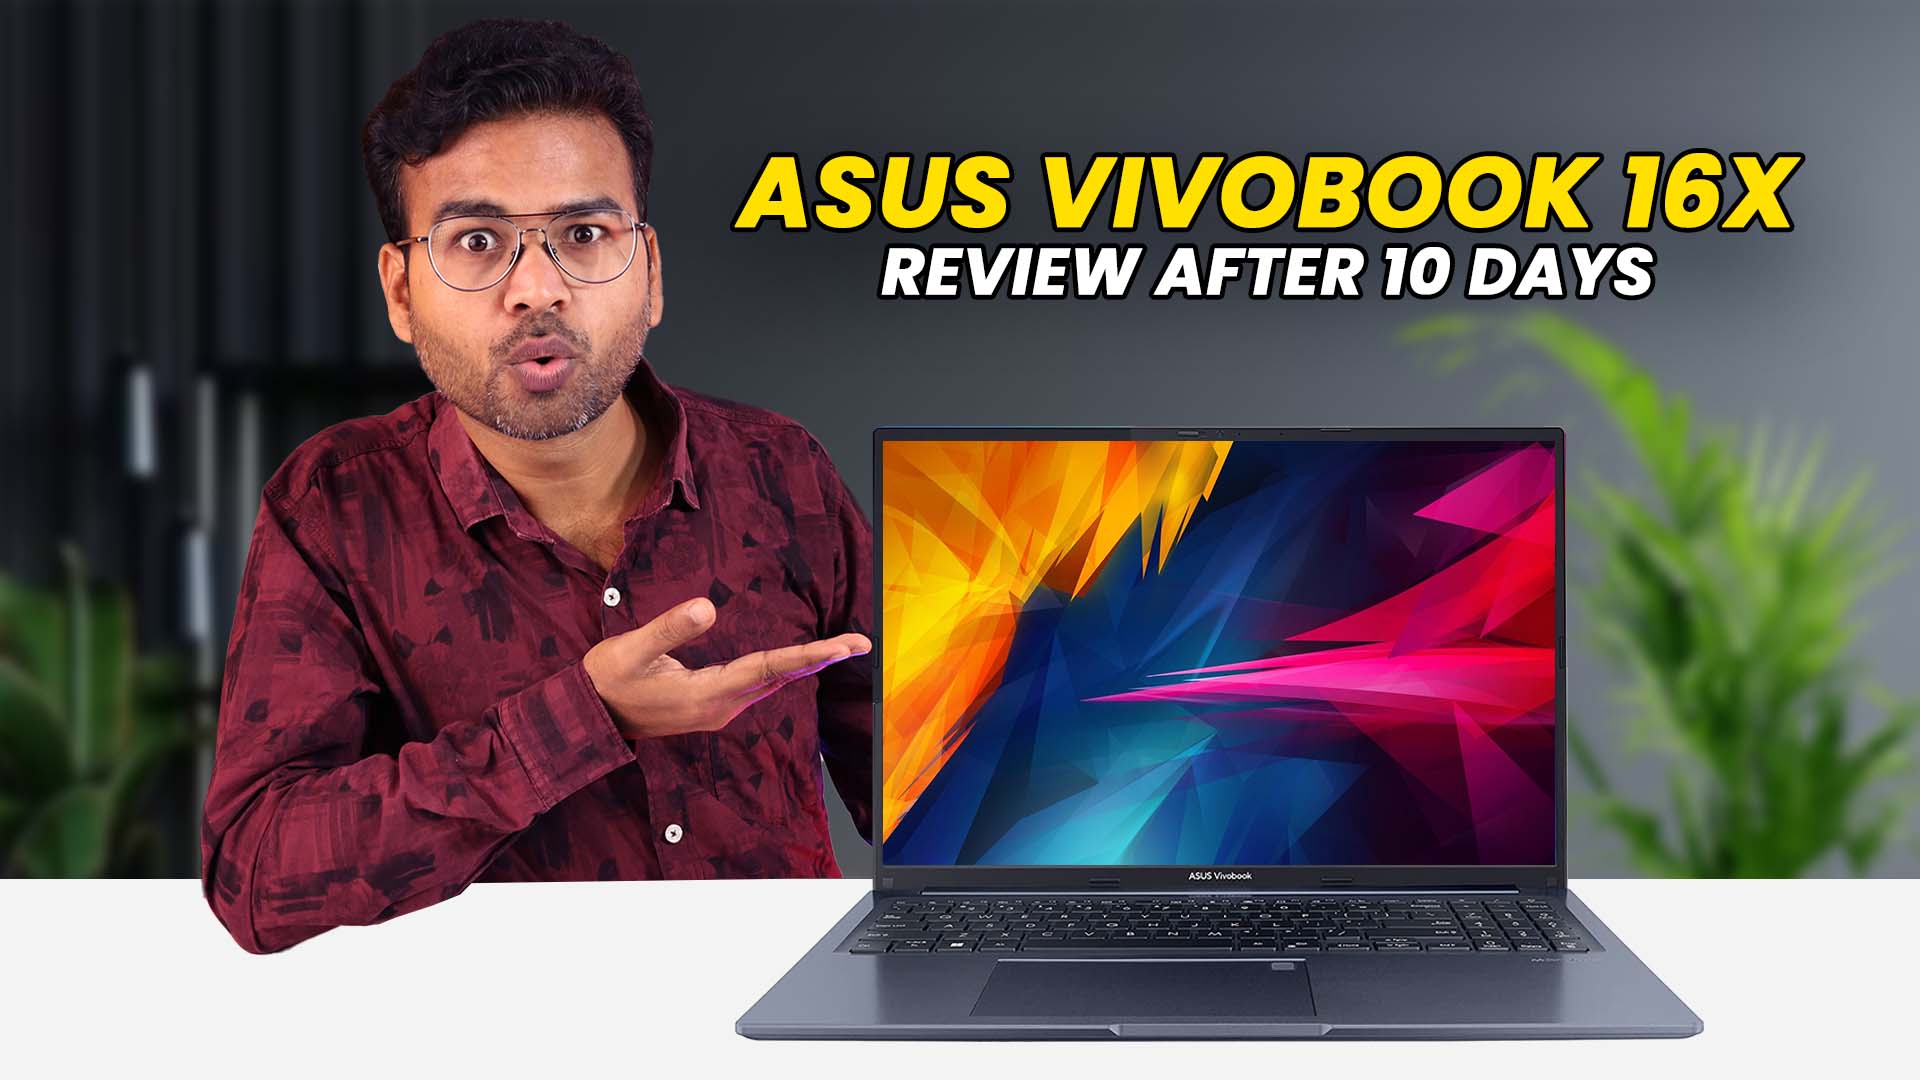 Asus Vivobook Pro 16X OLED Review: The Performance You Need